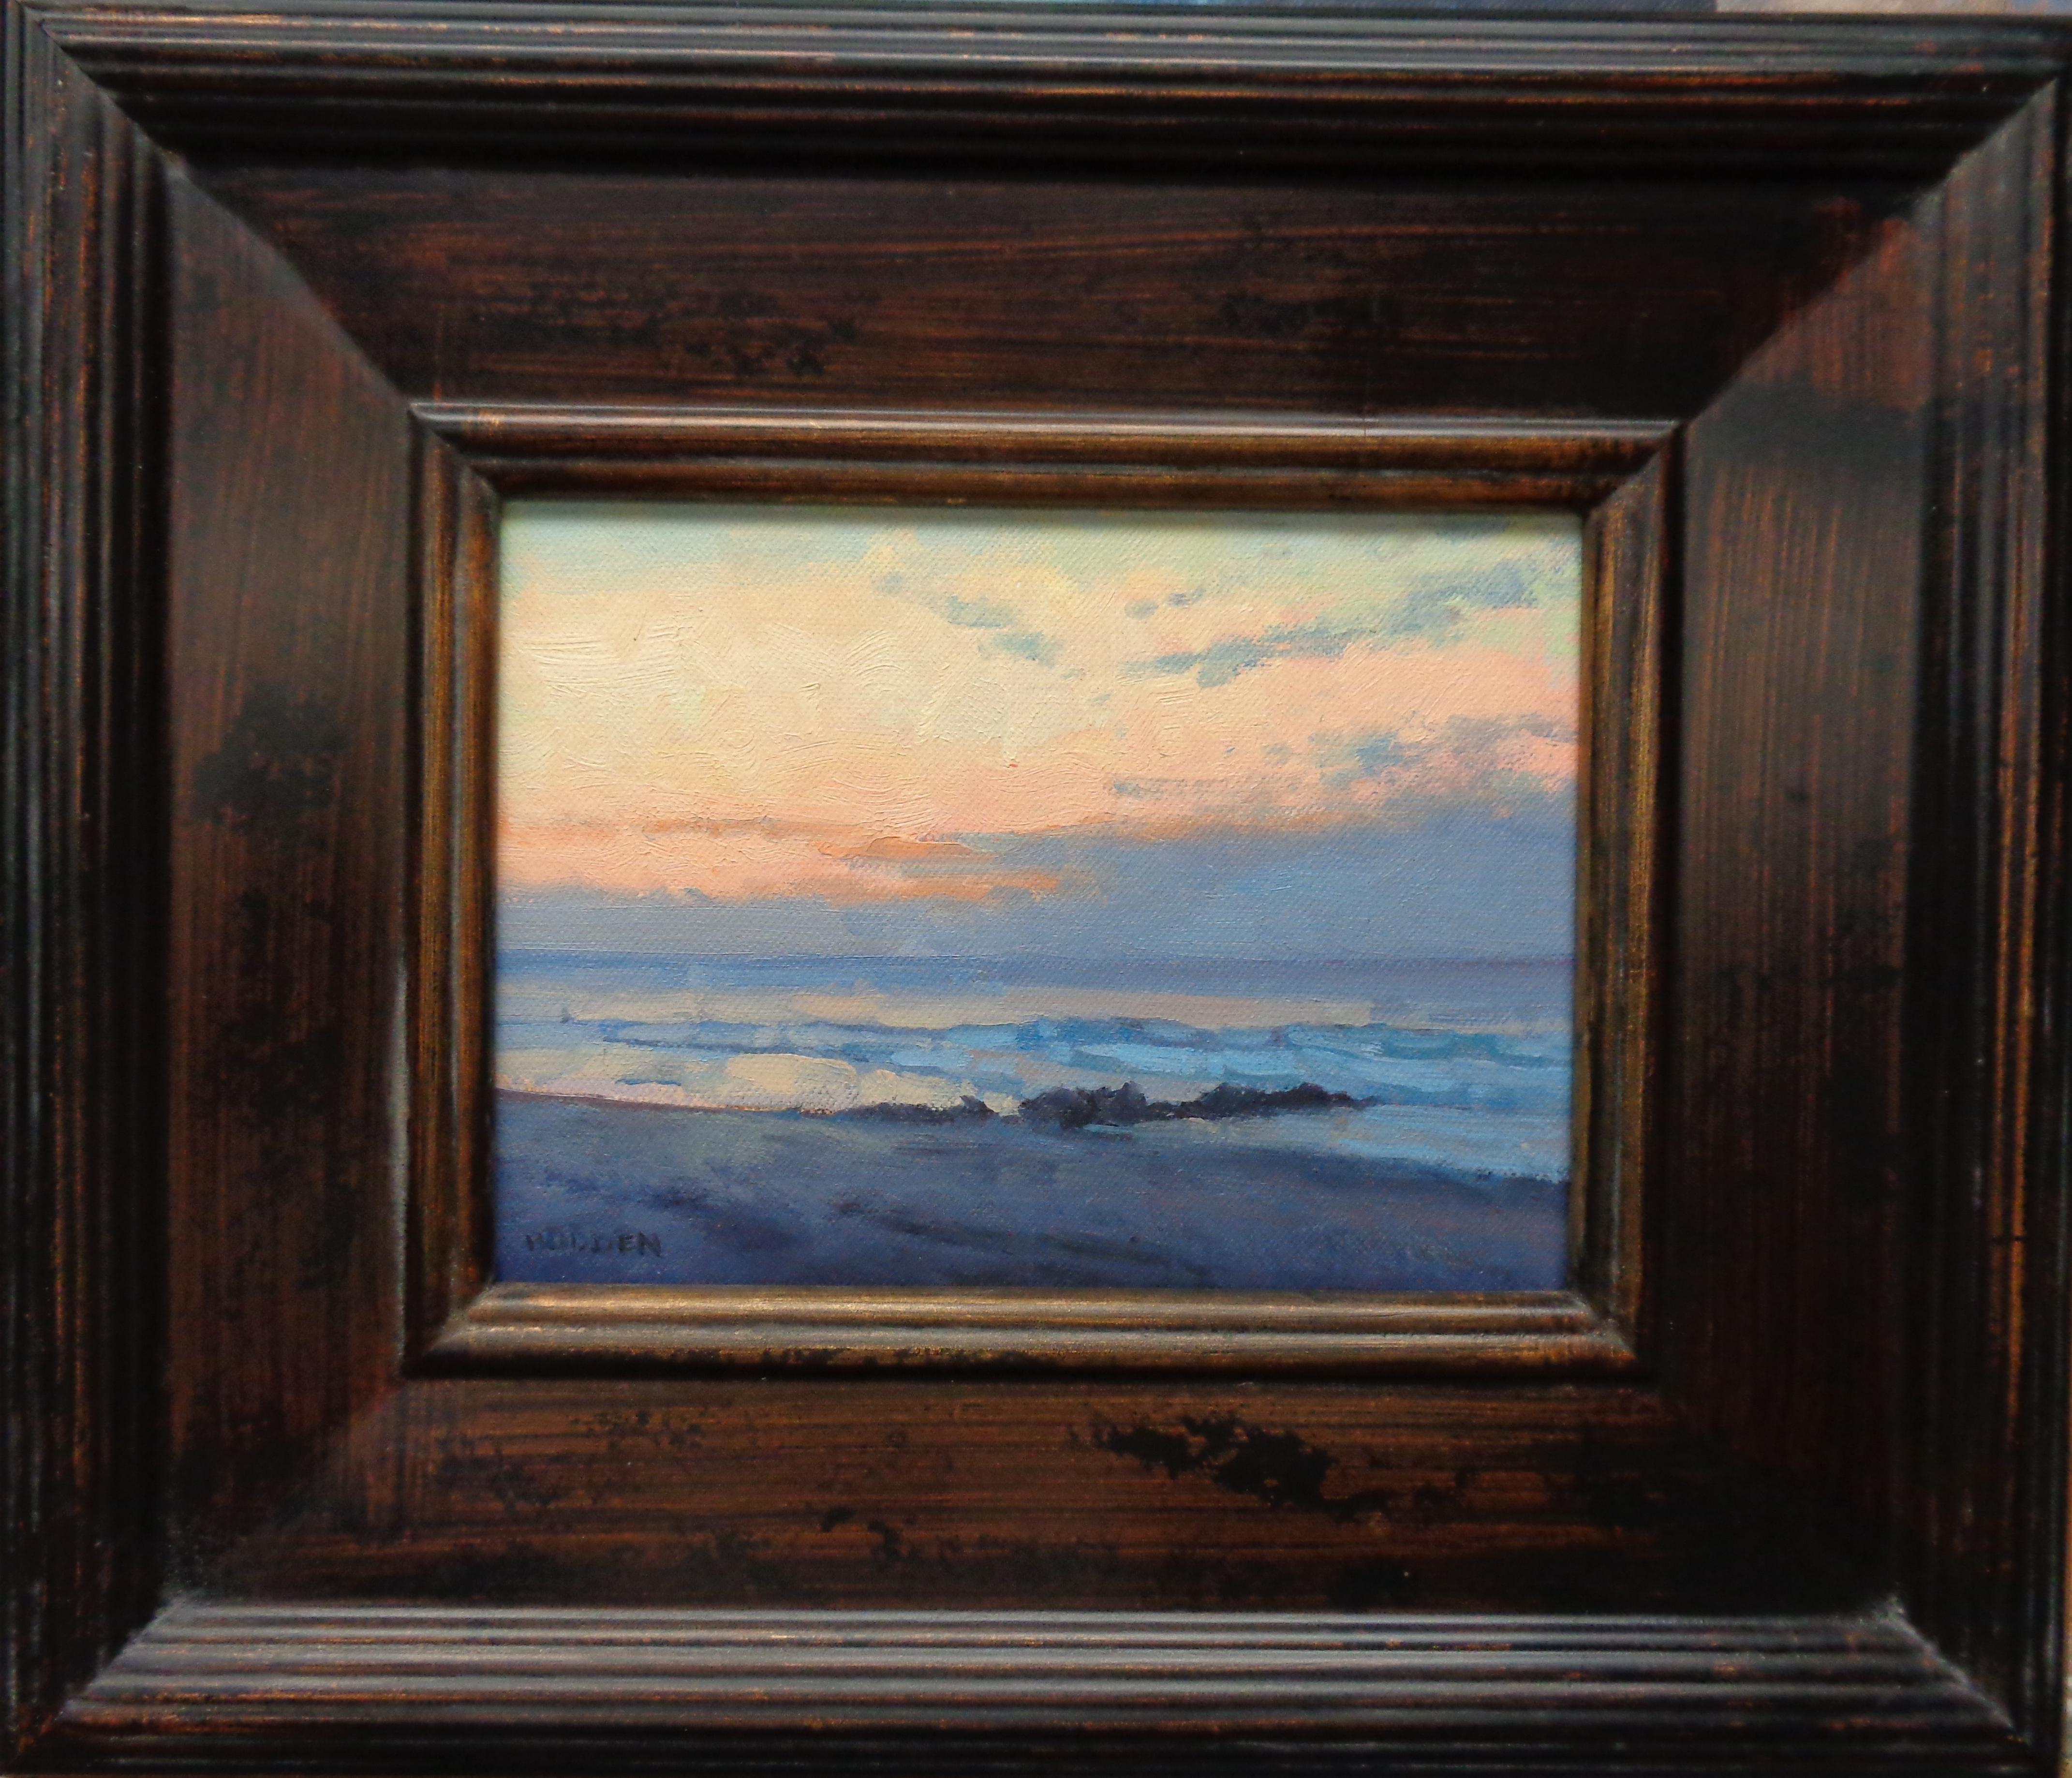 An study oil painting on canvas by award winning contemporary artist Michael Budden that showcases a unique composition of  a sunrise on the beach created in an impressionistic realism style. The painting exudes the very rich qualities of color, and